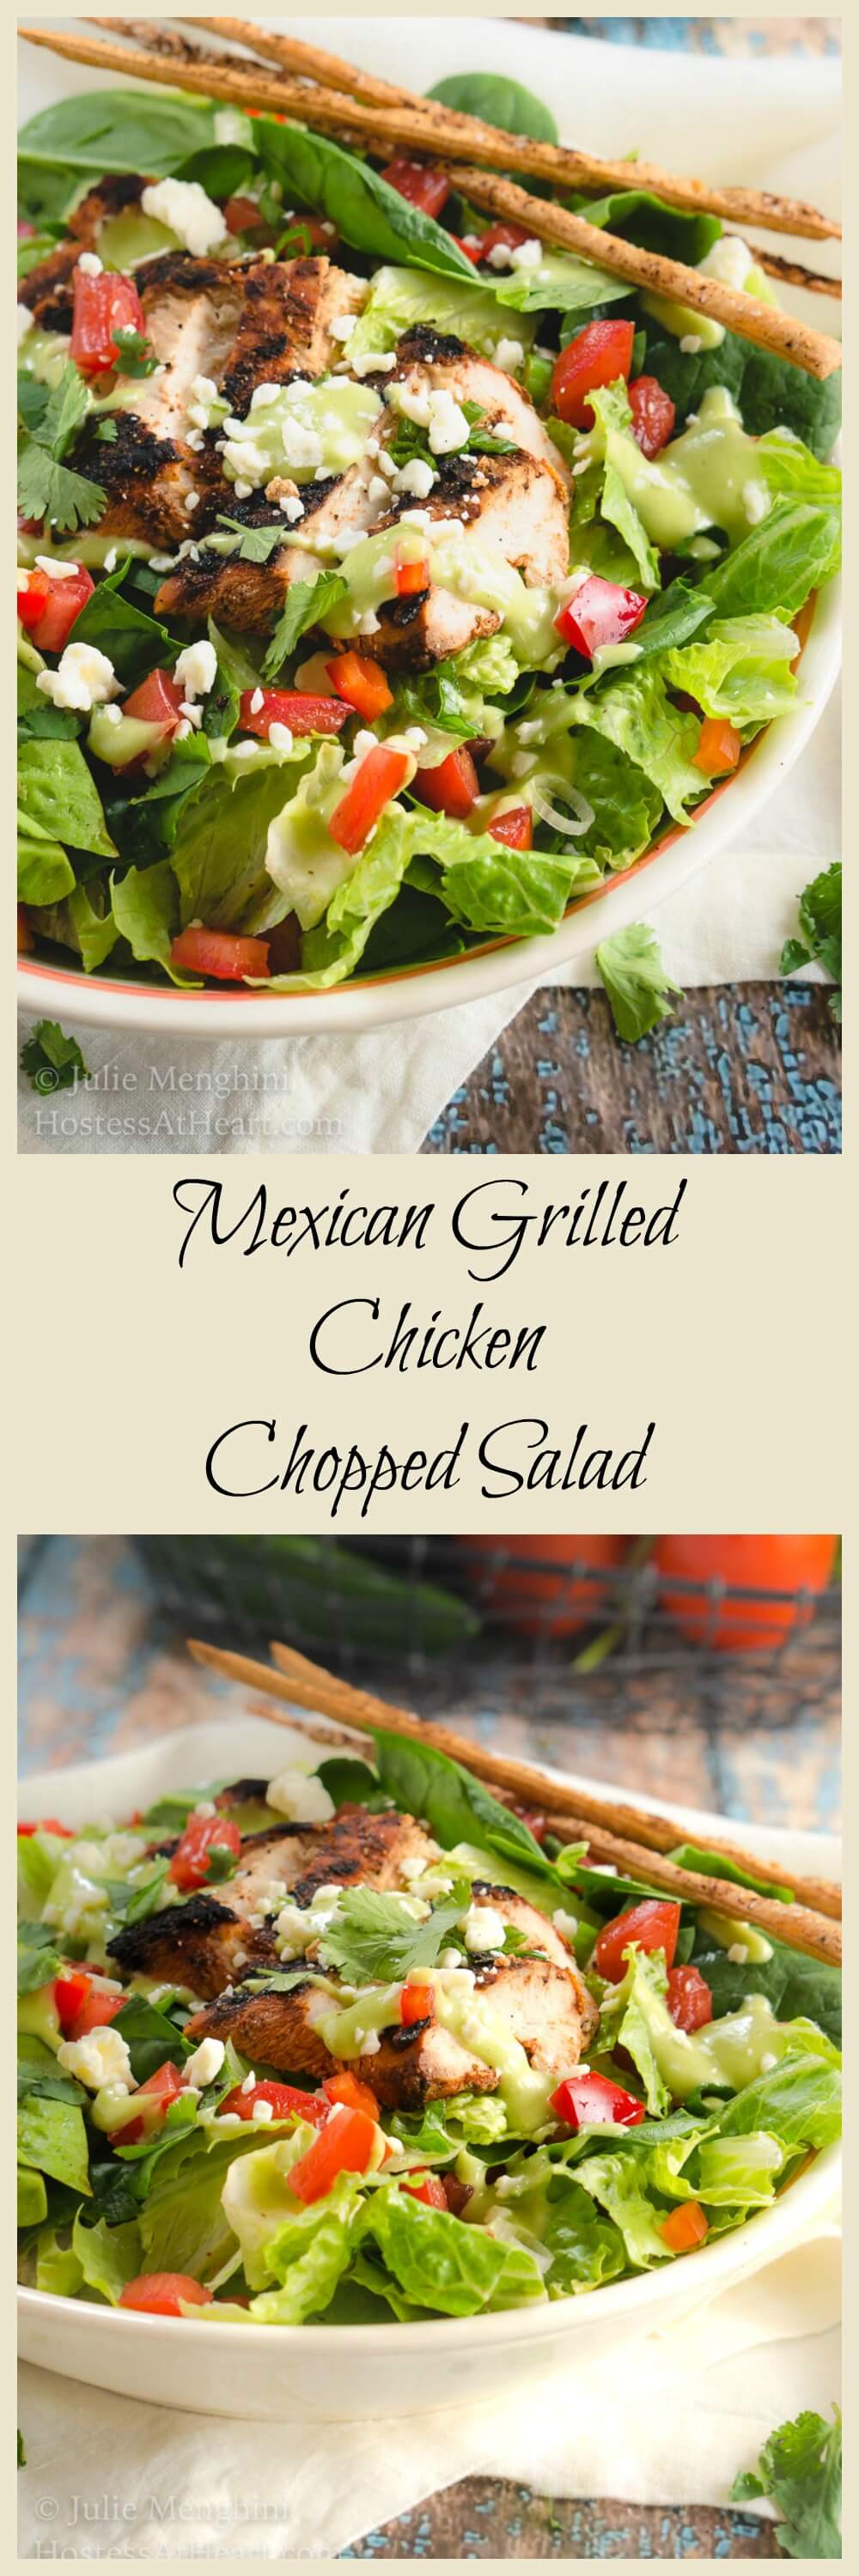 Mexican Grilled Chicken Chopped Salad with Honey Jalapeno Dressing ...